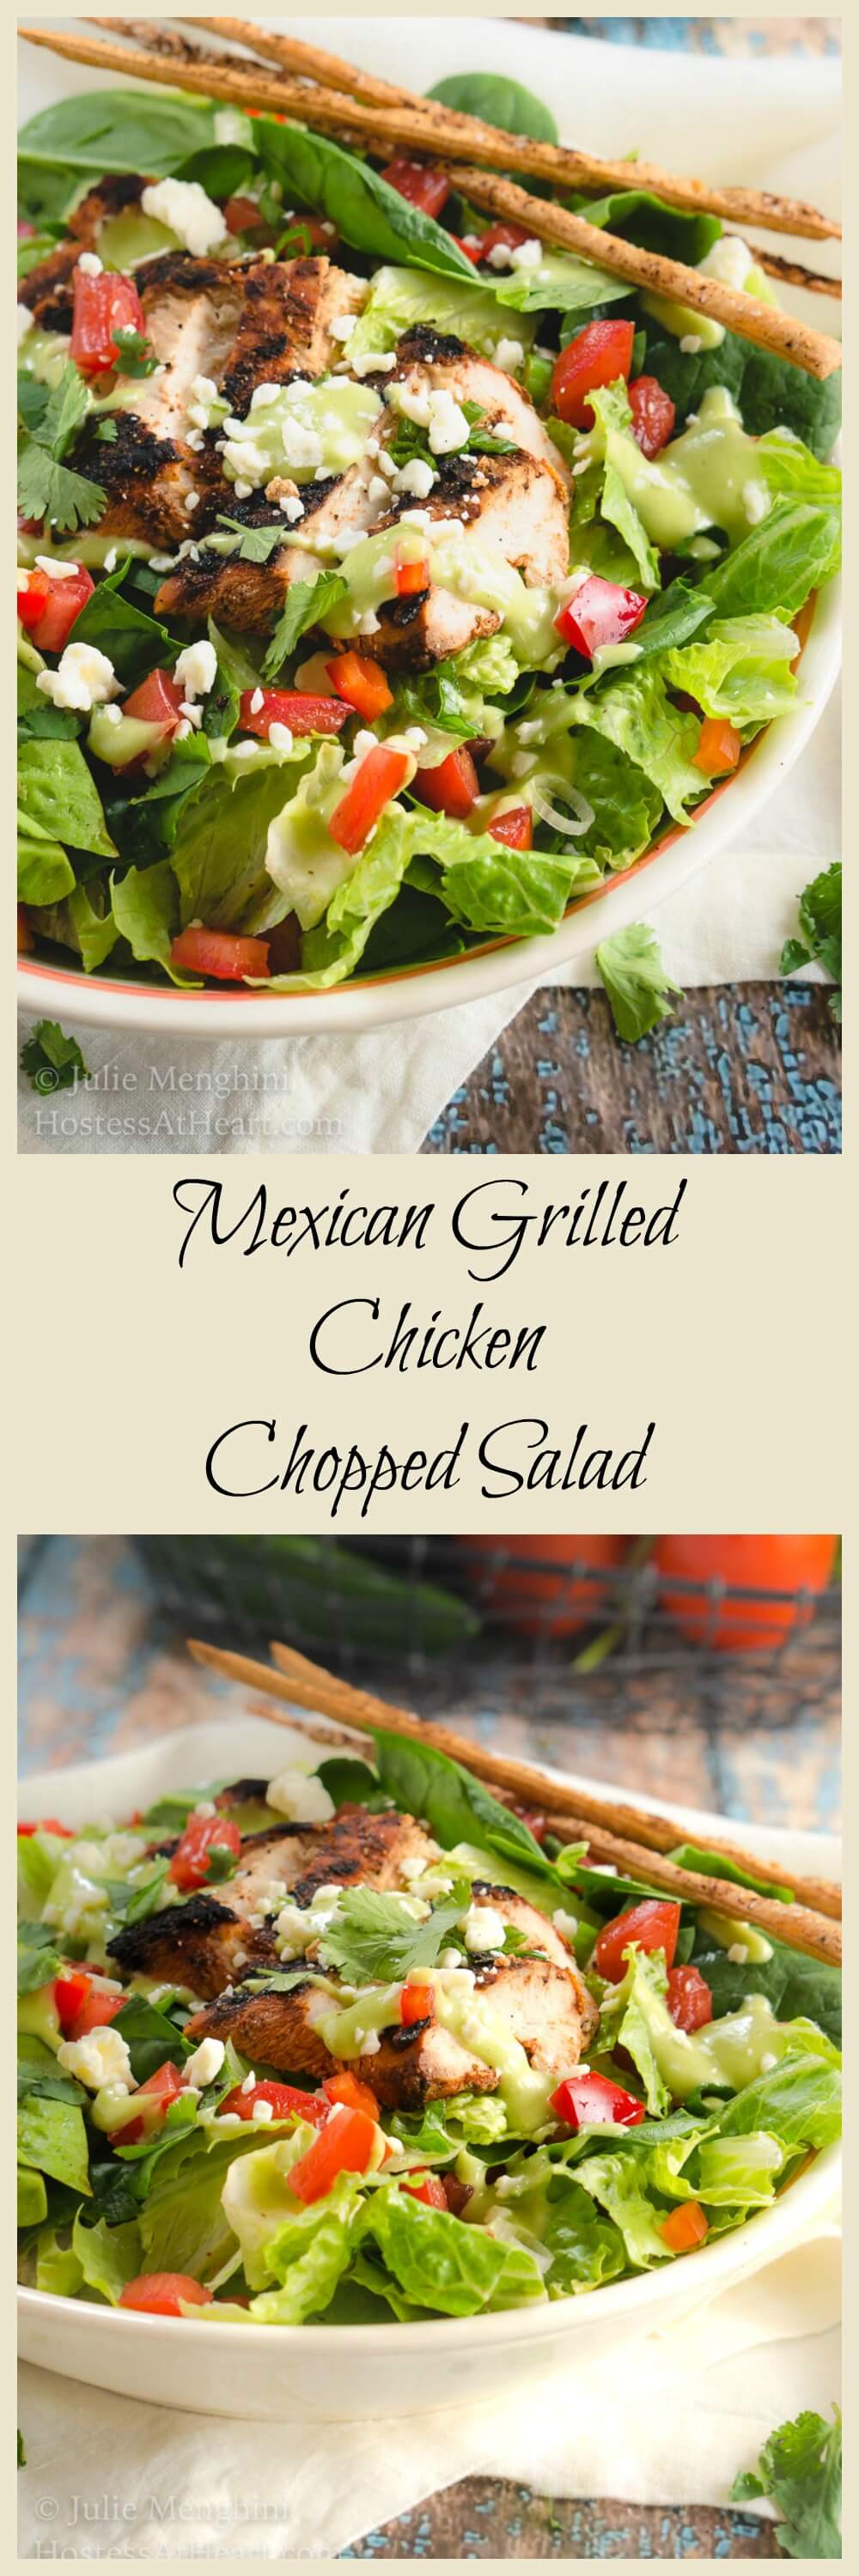 Mexican Grilled Chicken Chopped Salad with Honey Jalapeno Dressing ...